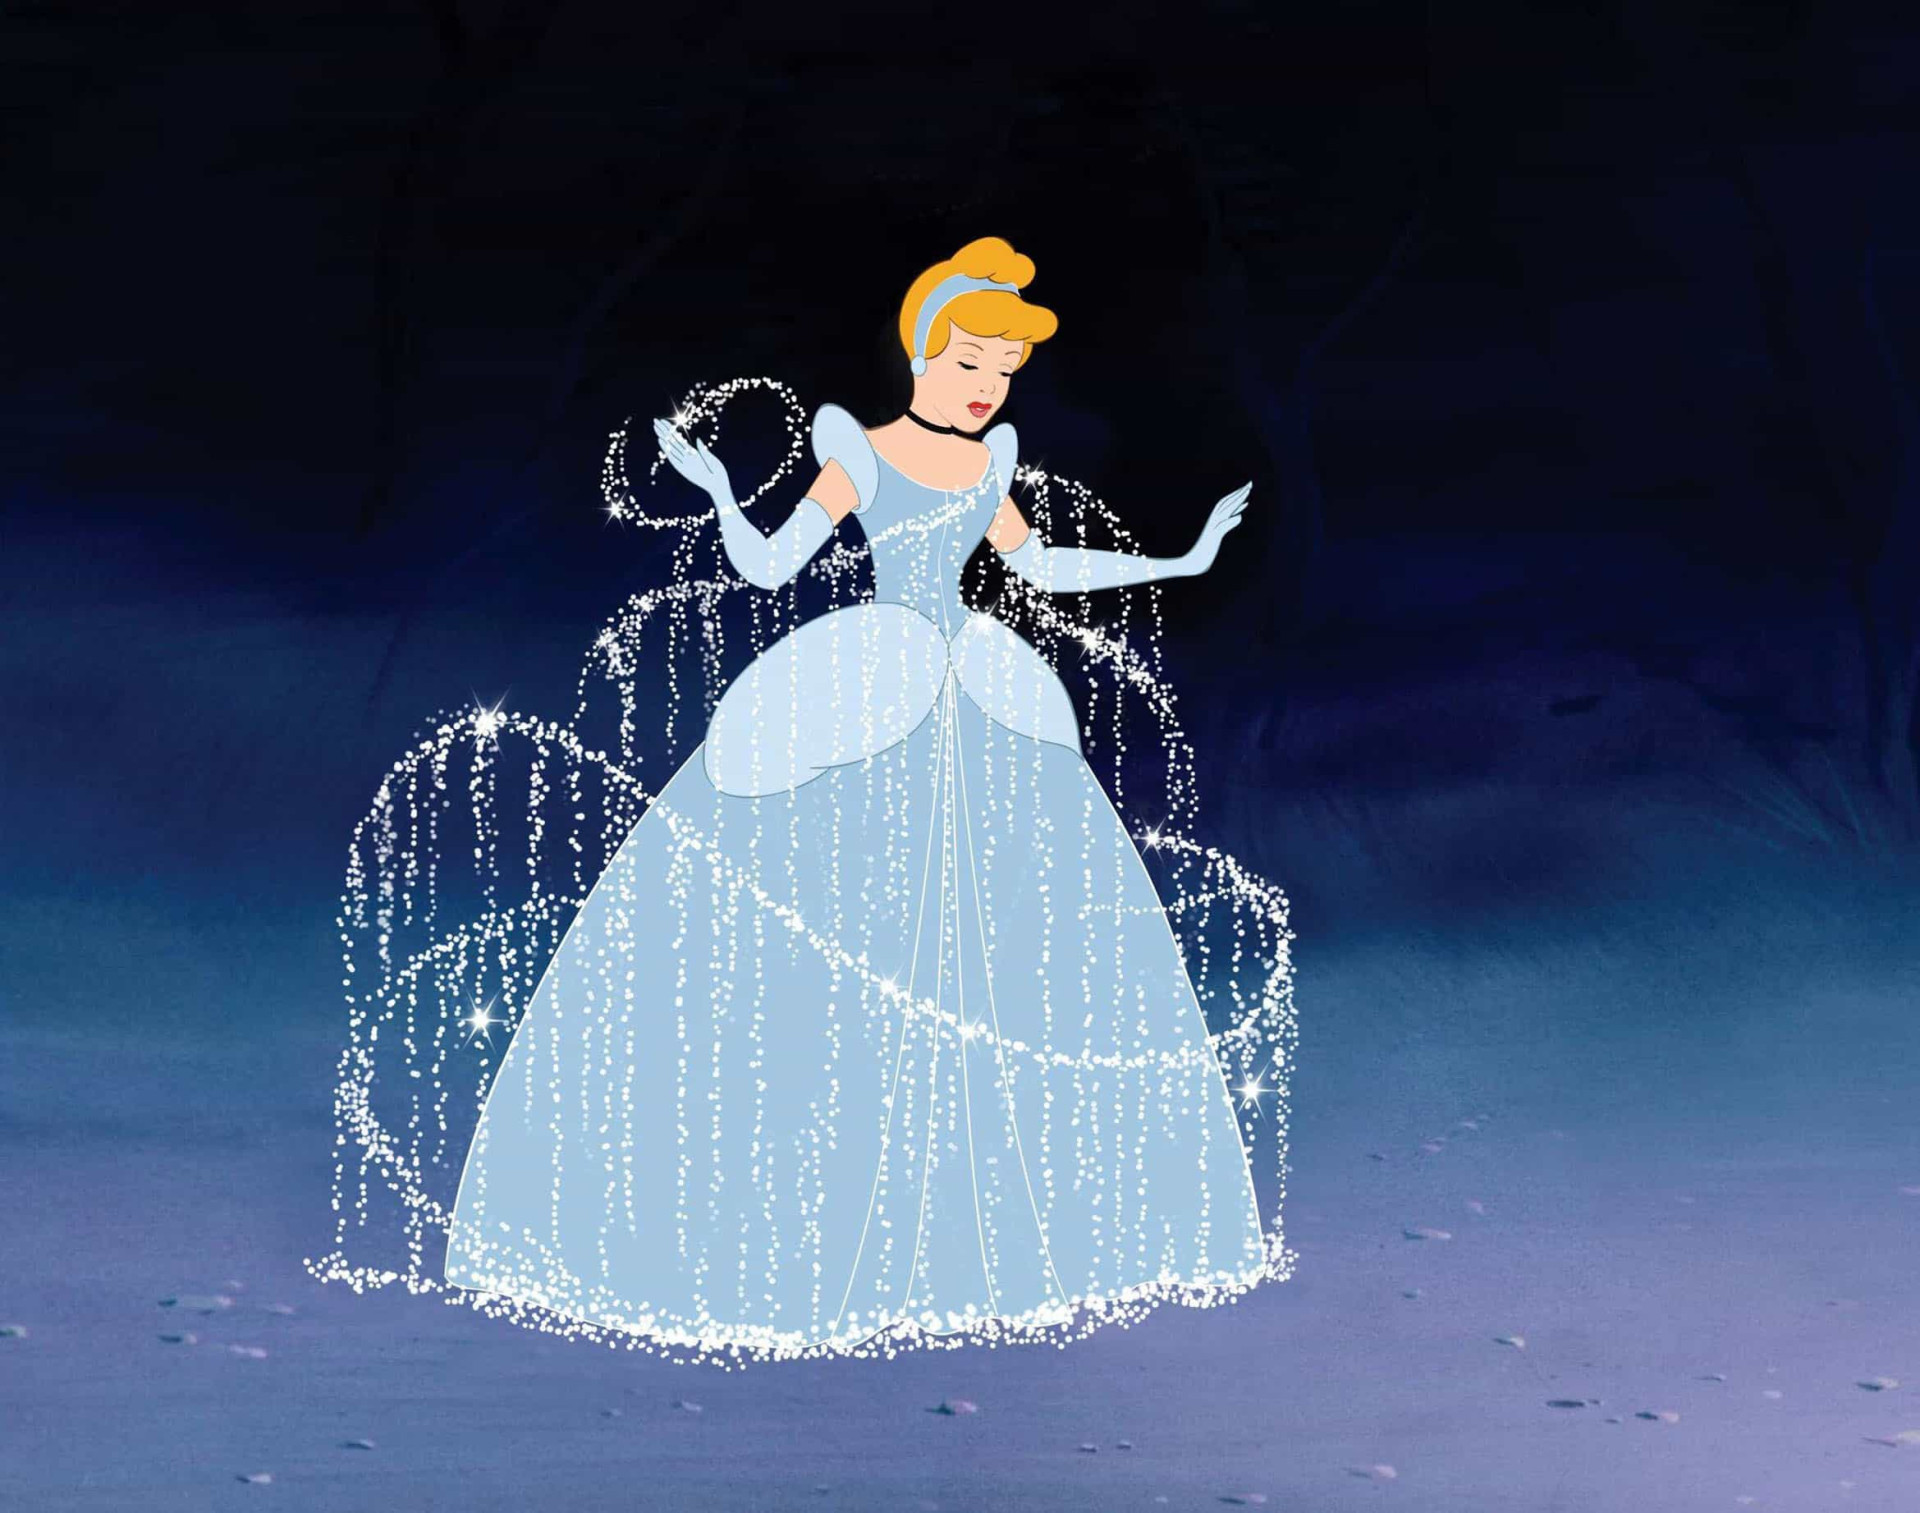 <p>Not only is 'Cinderella' (1950) a Disney classic, but it also has this classic song that kids adore. Who doesn't want to turn into a princess or prince every now and then, right?</p><p><a href="https://www.msn.com/en-us/community/channel/vid-7xx8mnucu55yw63we9va2gwr7uihbxwc68fxqp25x6tg4ftibpra?cvid=94631541bc0f4f89bfd59158d696ad7e">Follow us and access great exclusive content every day</a></p>